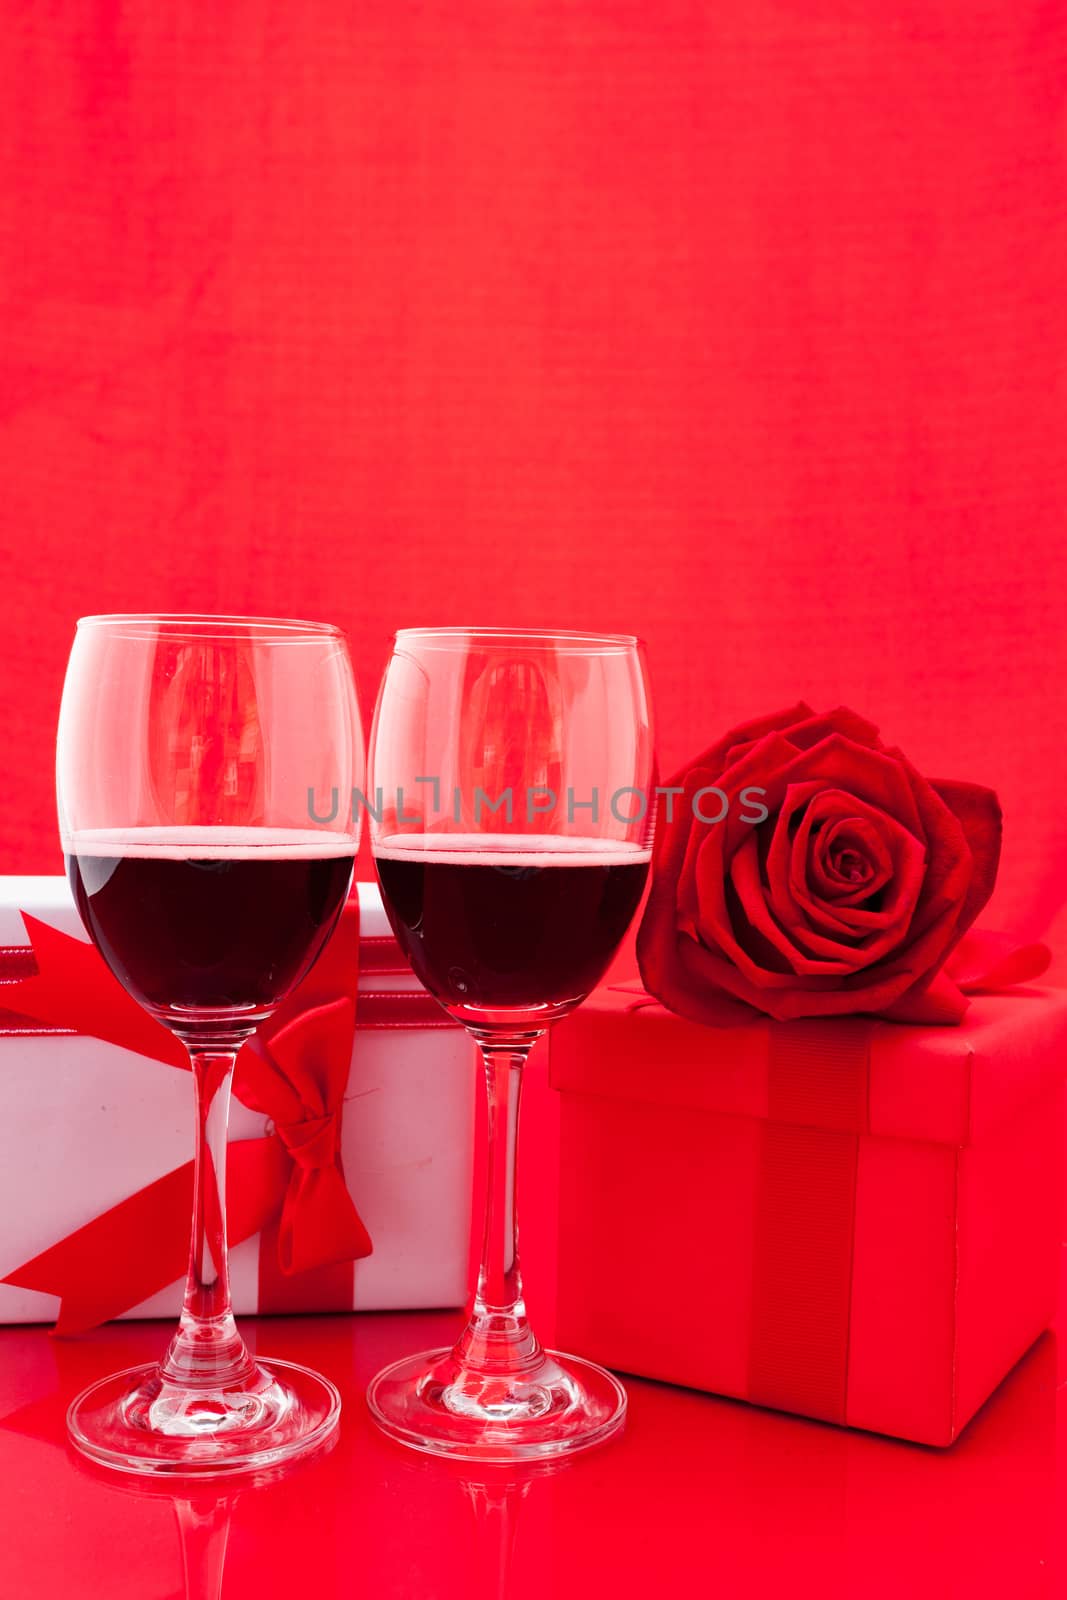 St Valentine's setting with present and red wine by nopparats